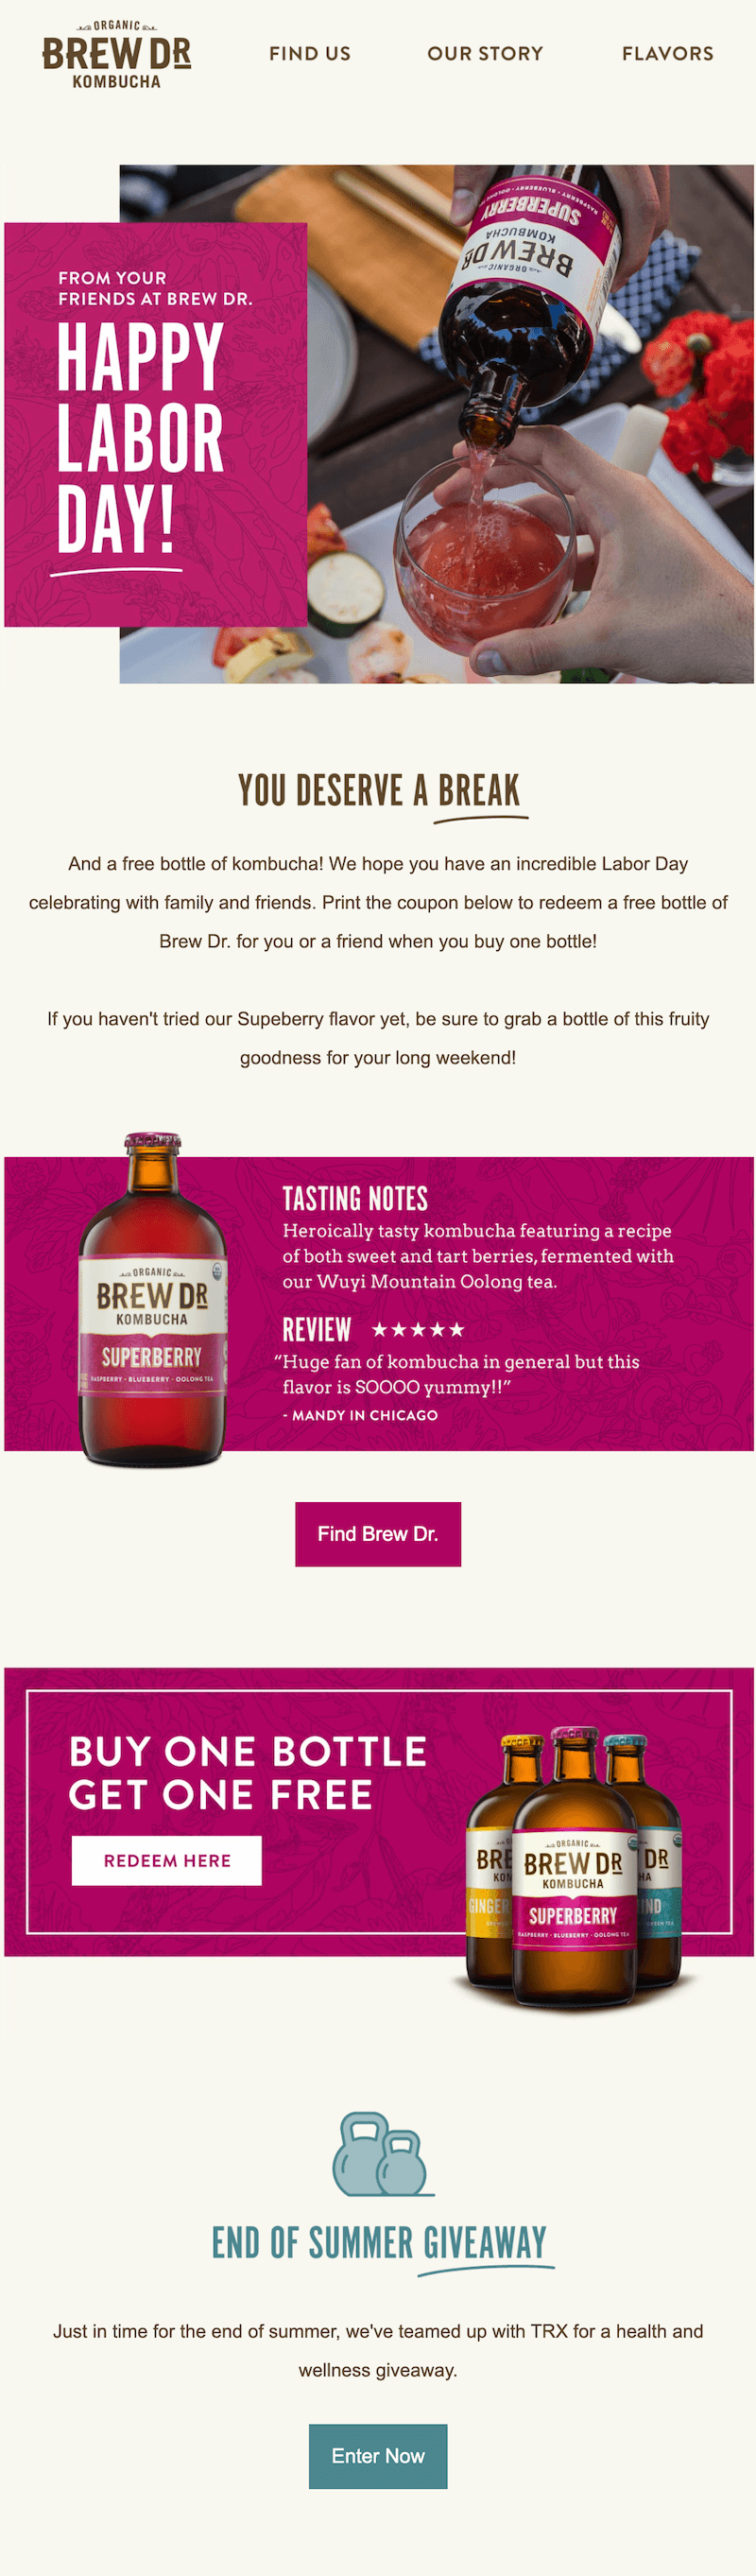 Labor Day giveaway email from Brew Dr. Kombucha with a tagline “You deserve a break”